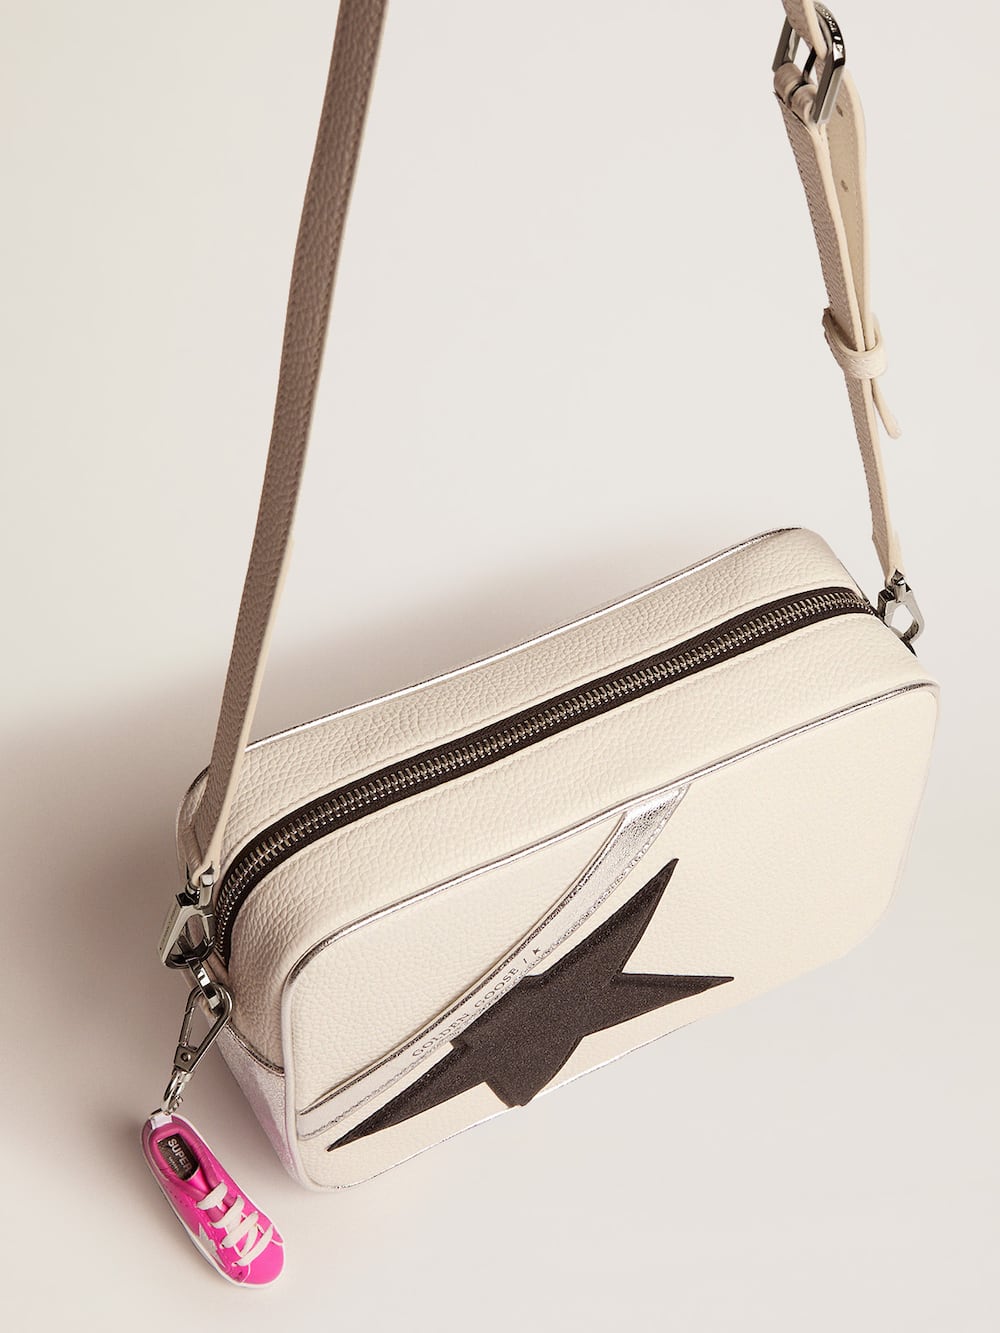 Golden Goose - Star Bag in white hammered leather, metallic silver trim and black glitter star in 